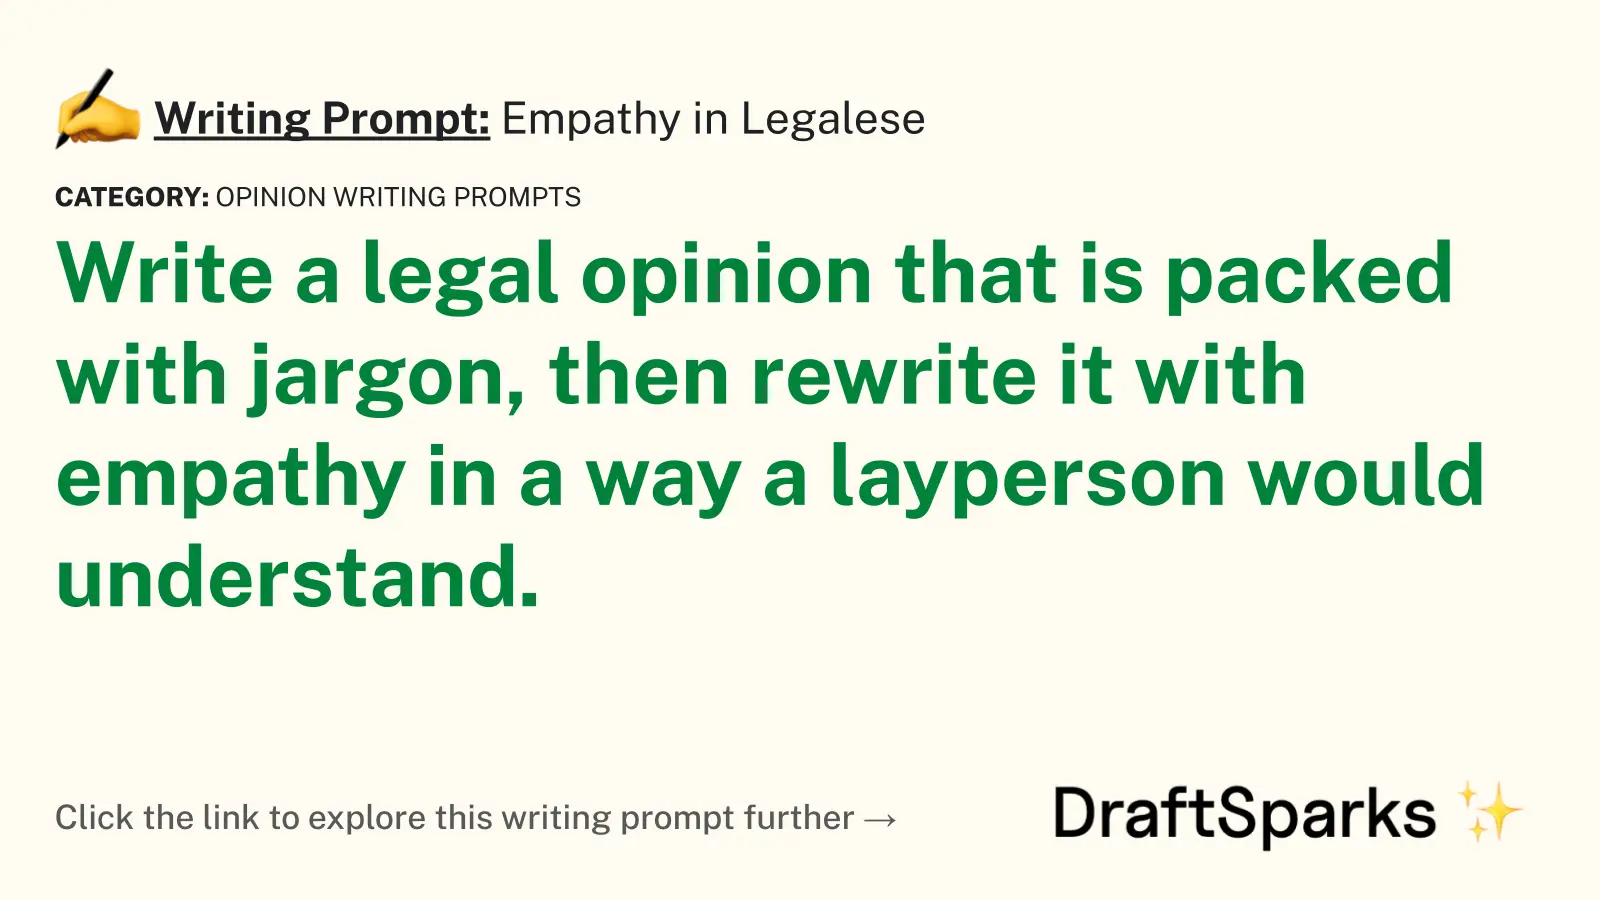 Empathy in Legalese